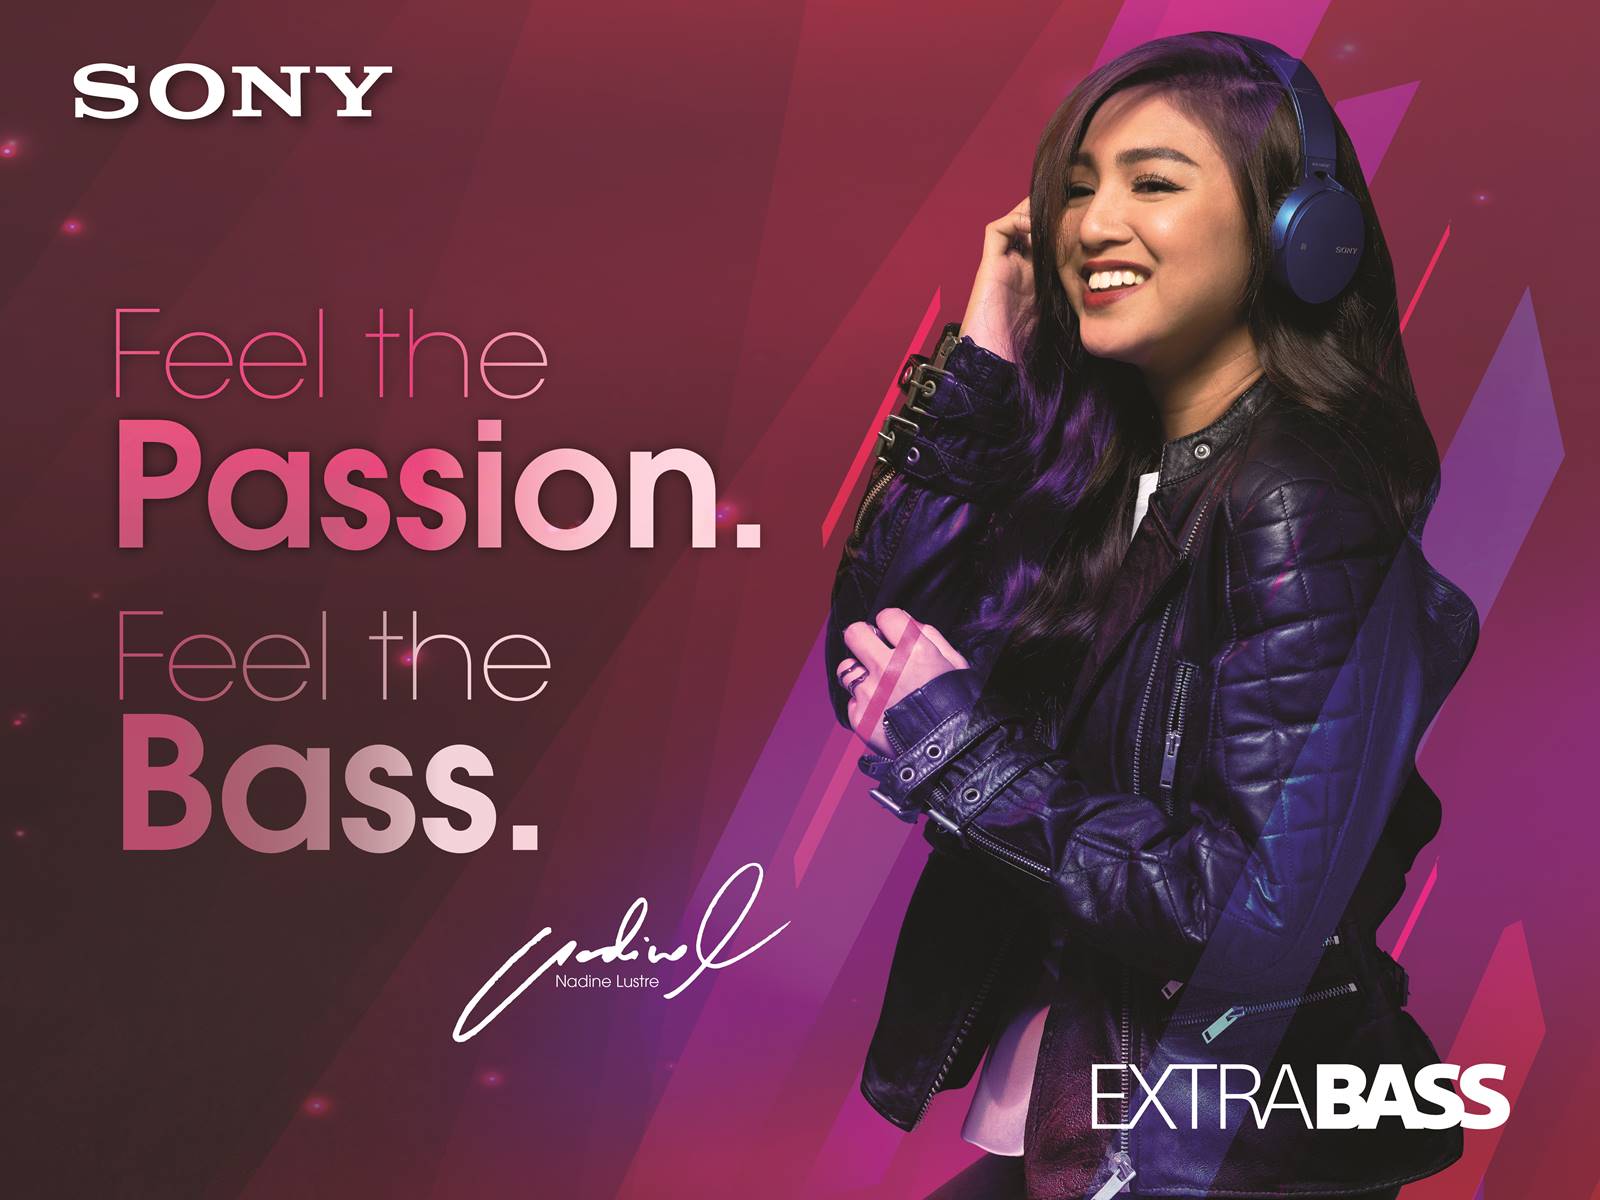 Sony Ph Reveals Nadine Lustre As Personal Audio Ambassador, - Nadine Lustre For Sony , HD Wallpaper & Backgrounds